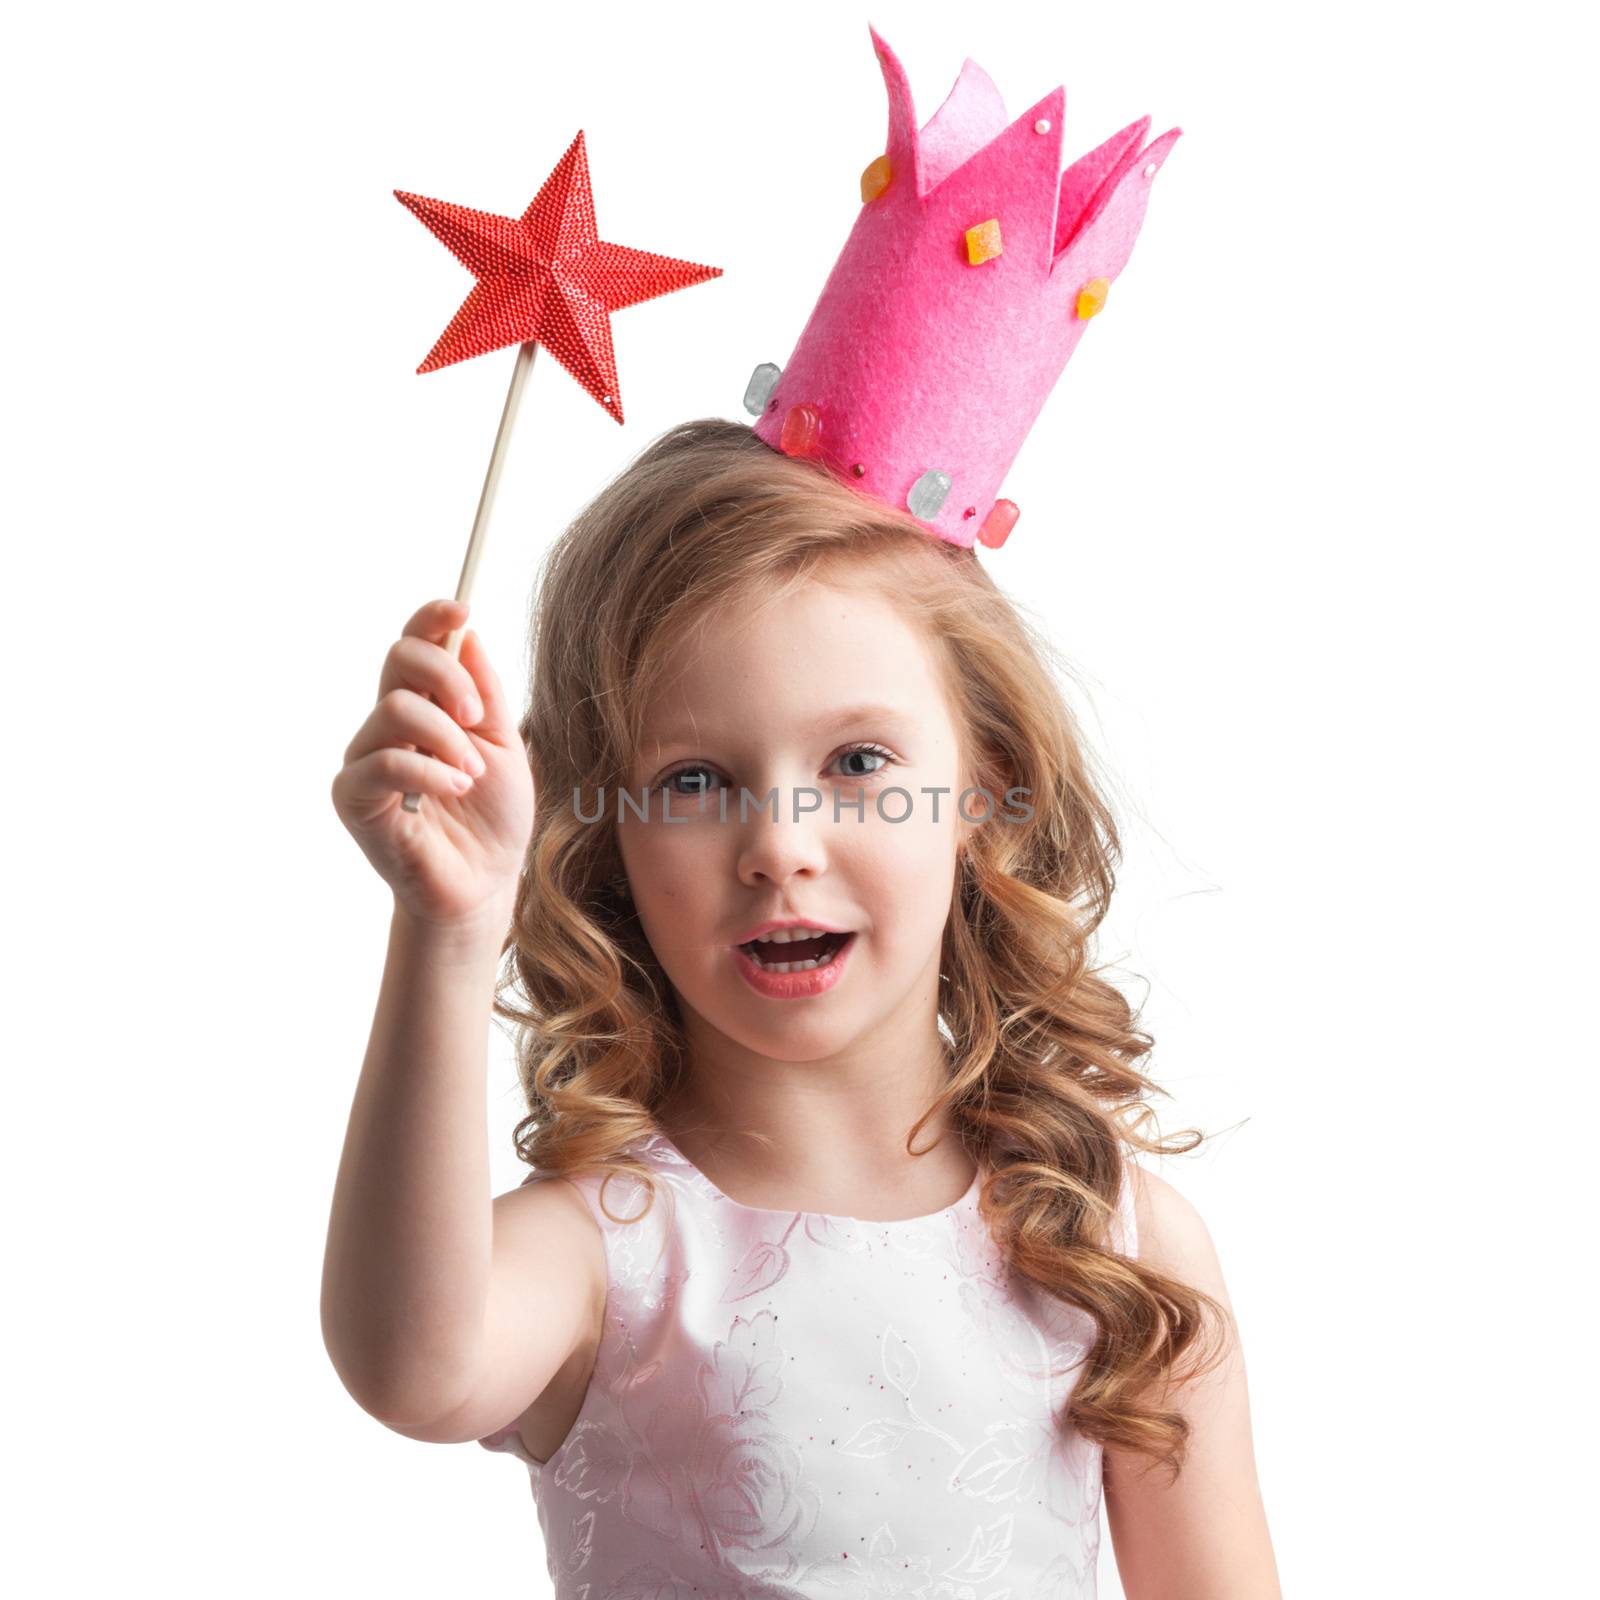 Beautiful little candy princess girl in crown holding star shaped magic wand and making a wish